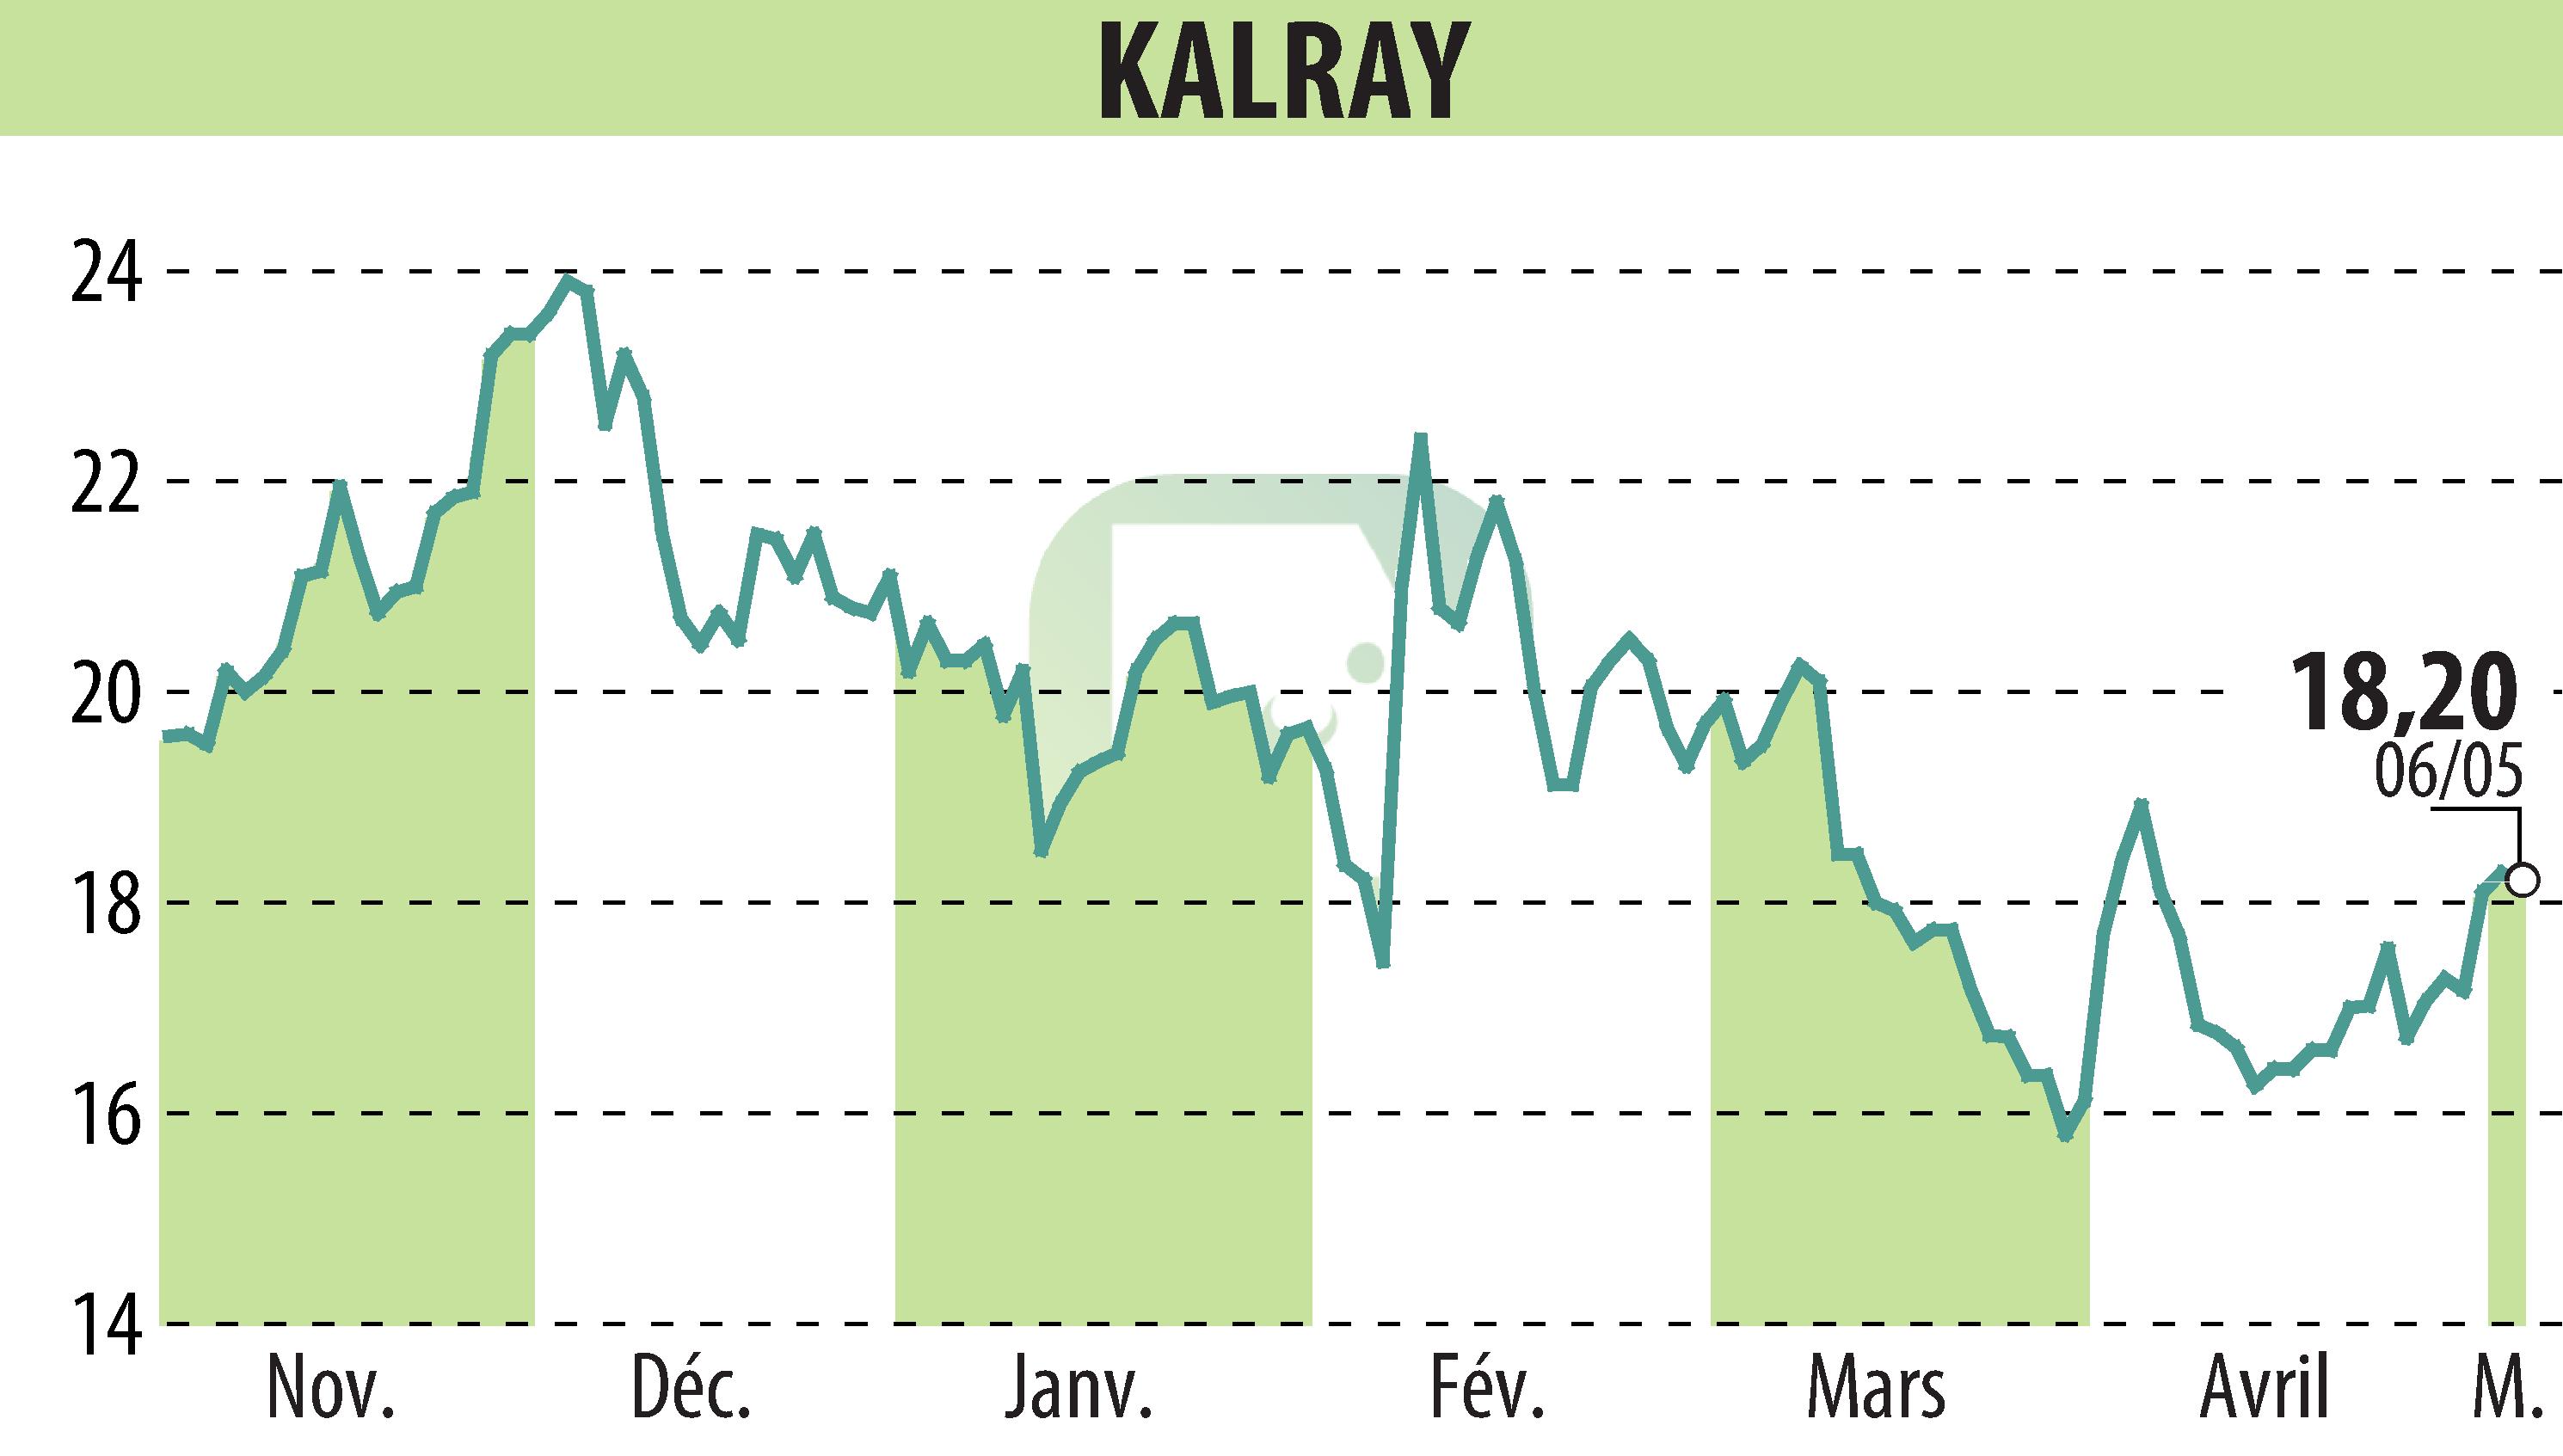 Stock price chart of KALRAY (EPA:ALKAL) showing fluctuations.